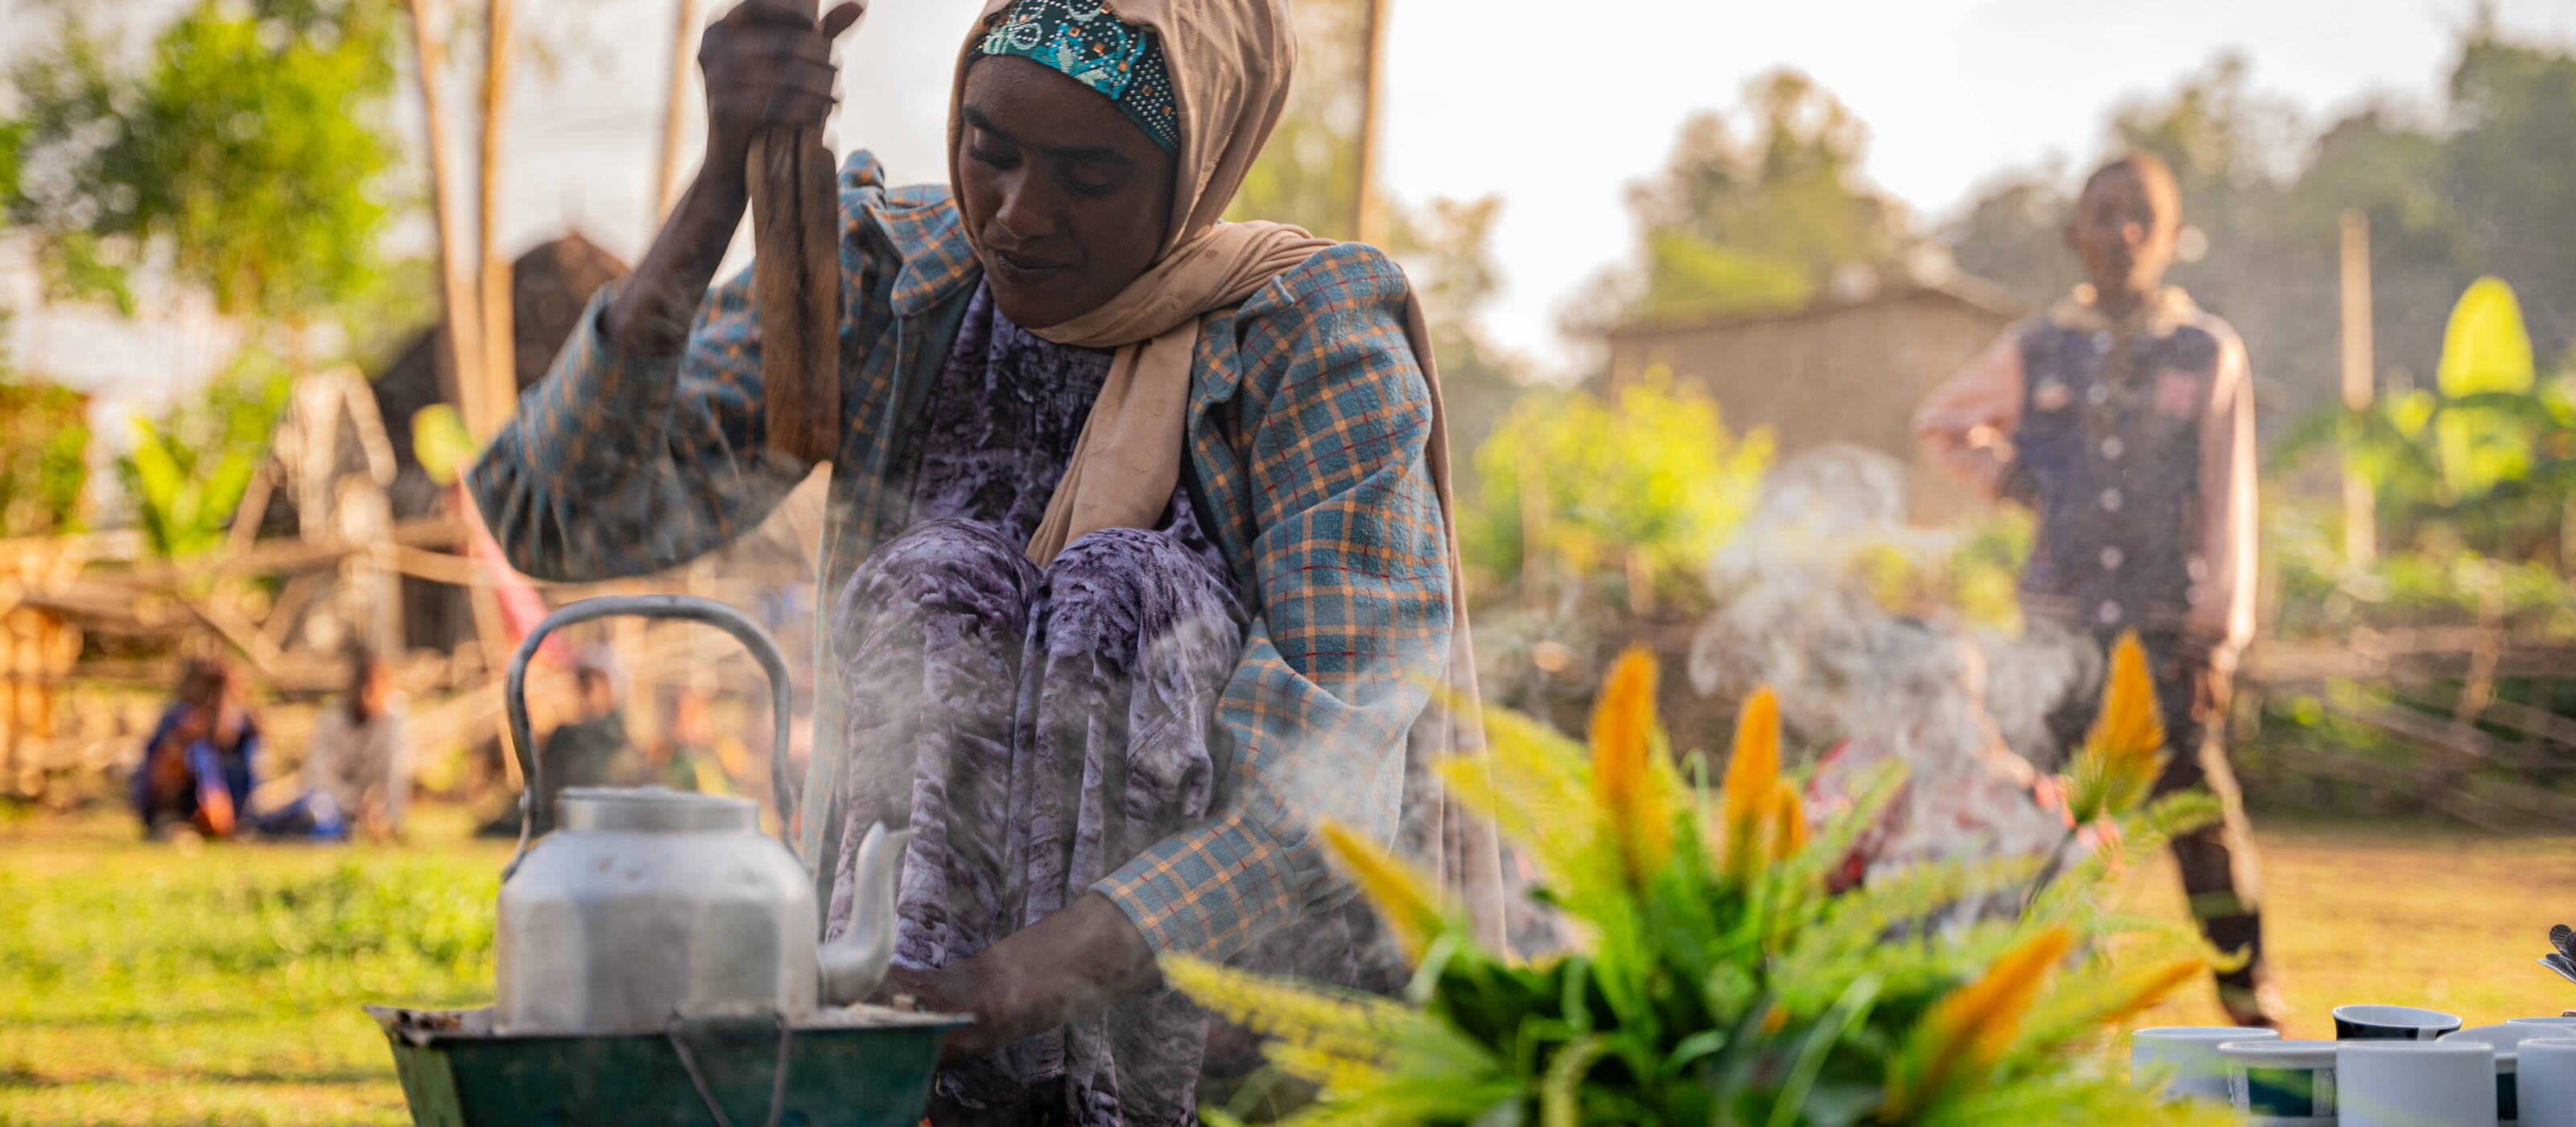 Coffee cultivation provides an important livelihood for many farmers in Ethiopia.